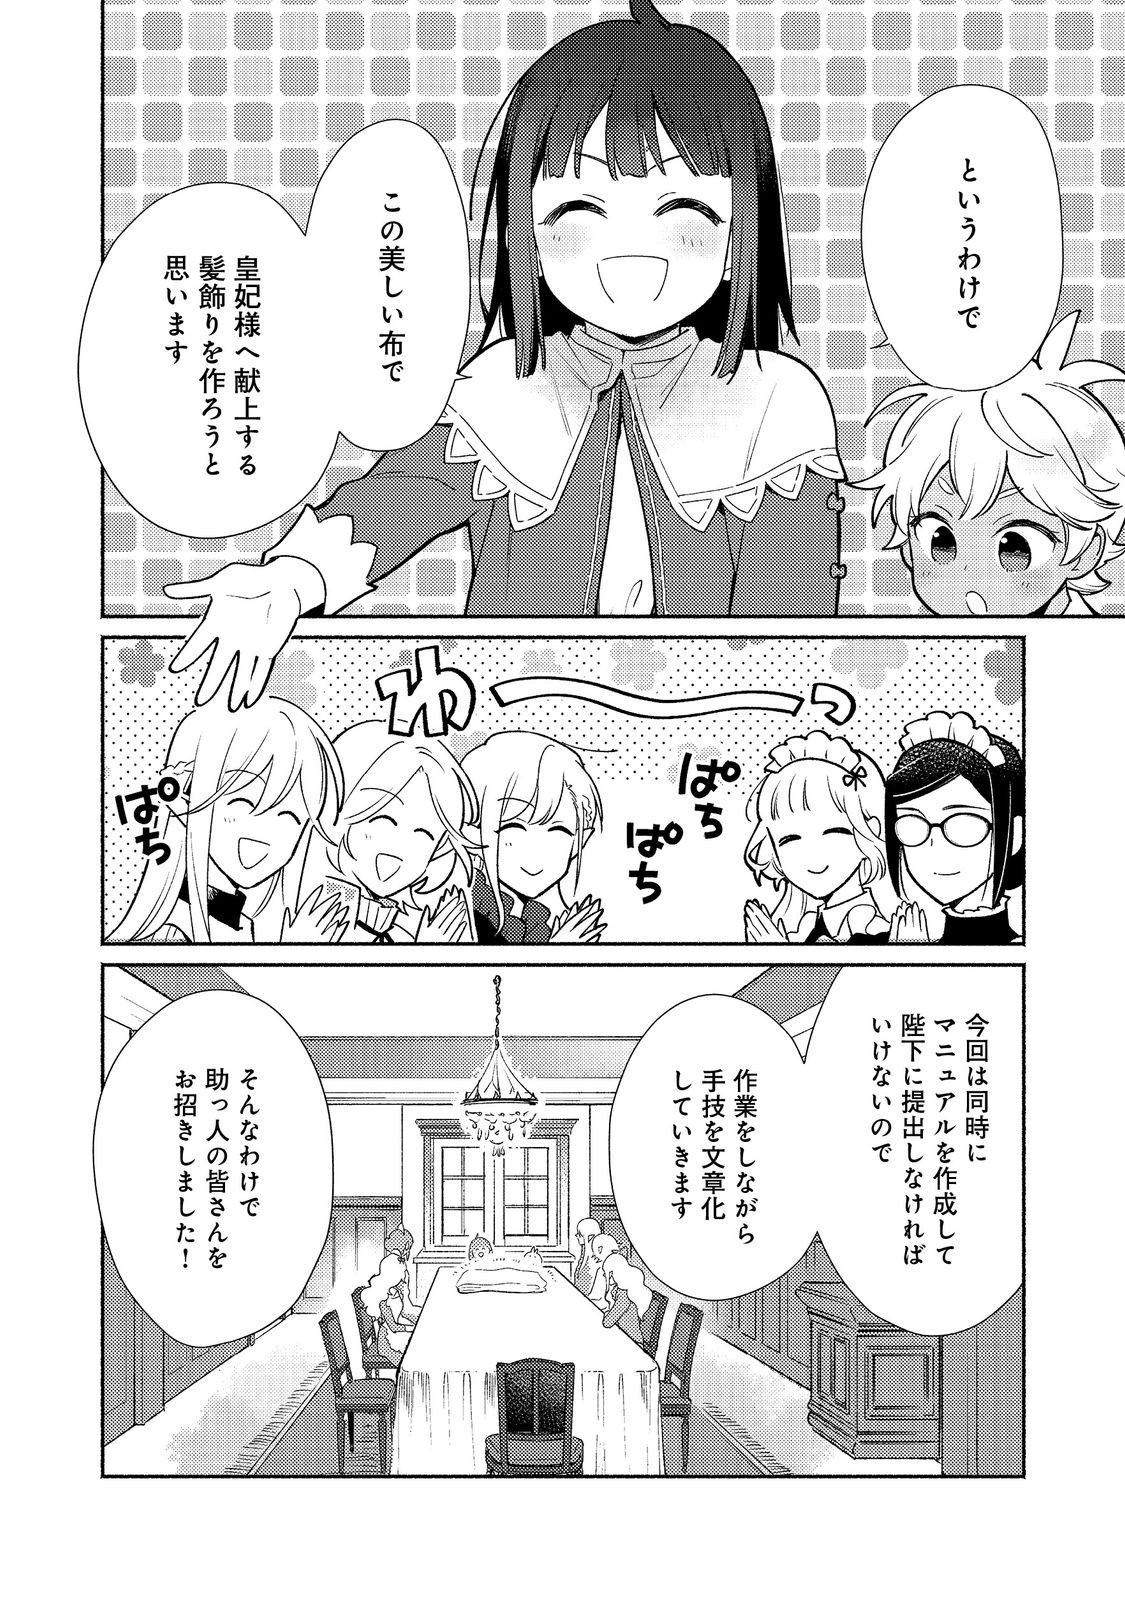 I’m the White Pig Nobleman 第21.1話 - Page 4